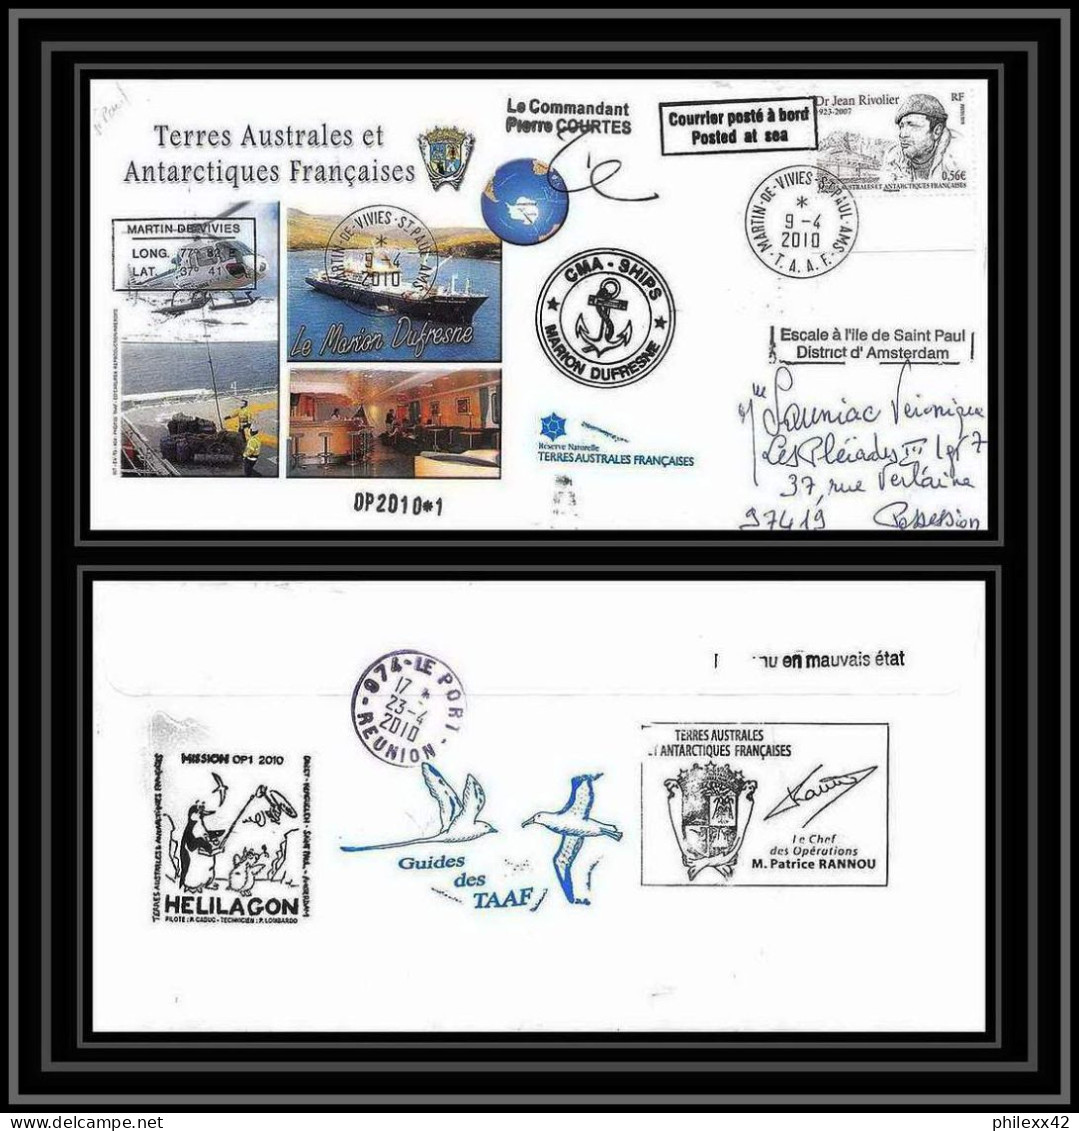 2997 Helilagon Terres Australes TAAF Lettre Cover Dufresne 2 Signé Signed St Paul Op 2010/1 9/4/2010 N°557 - Helicopters